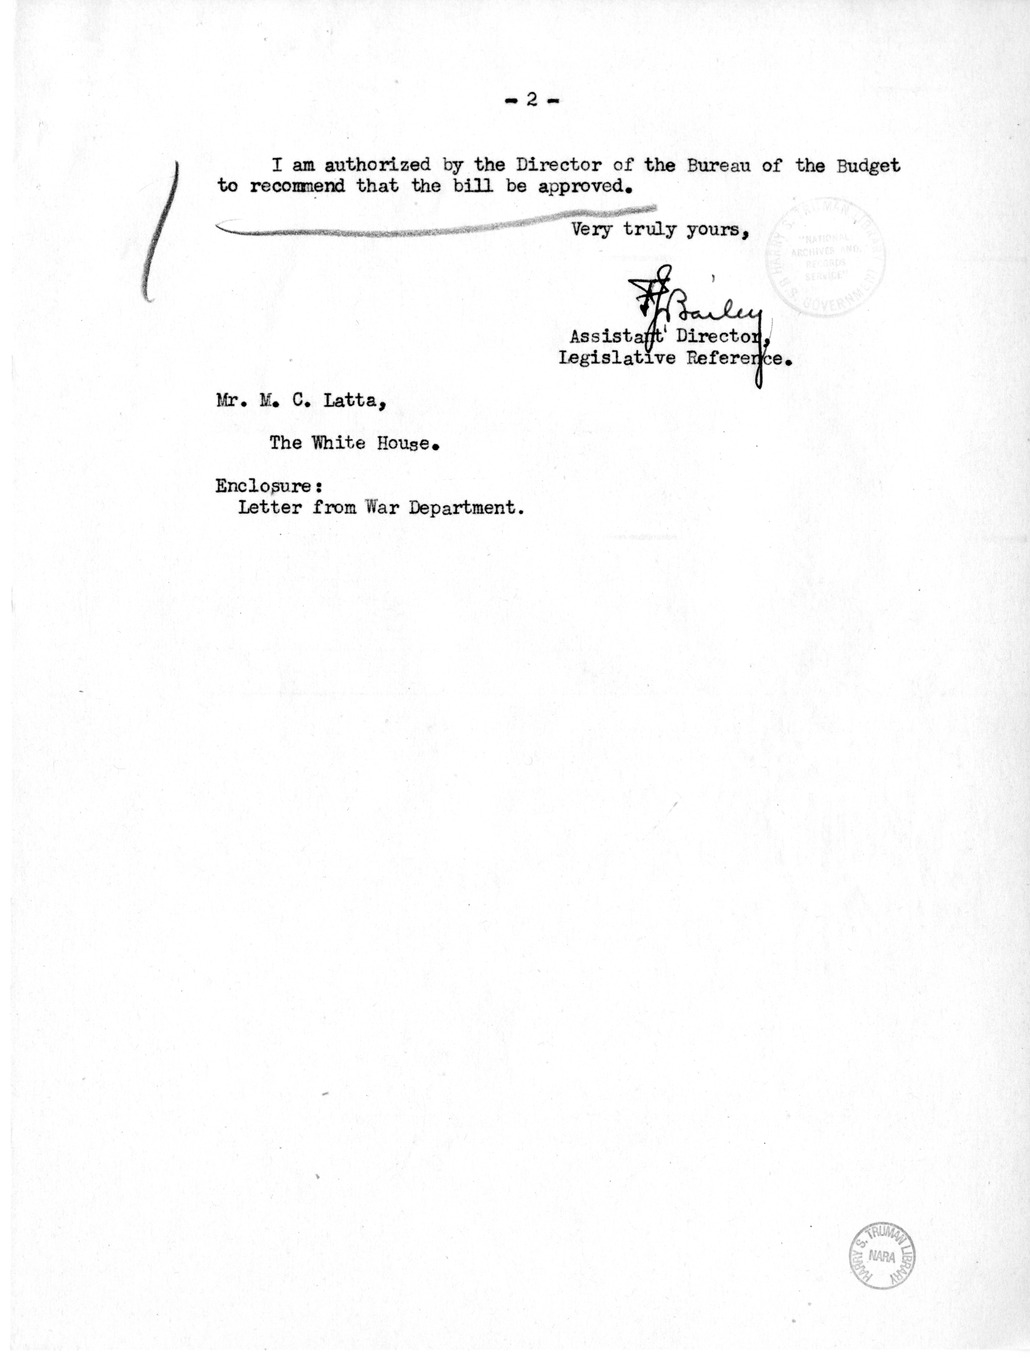 Memorandum from Frederick J. Bailey to M. C. Latta, S. 359, for the Relief of Mrs. Ellen McCormack, with Attachments